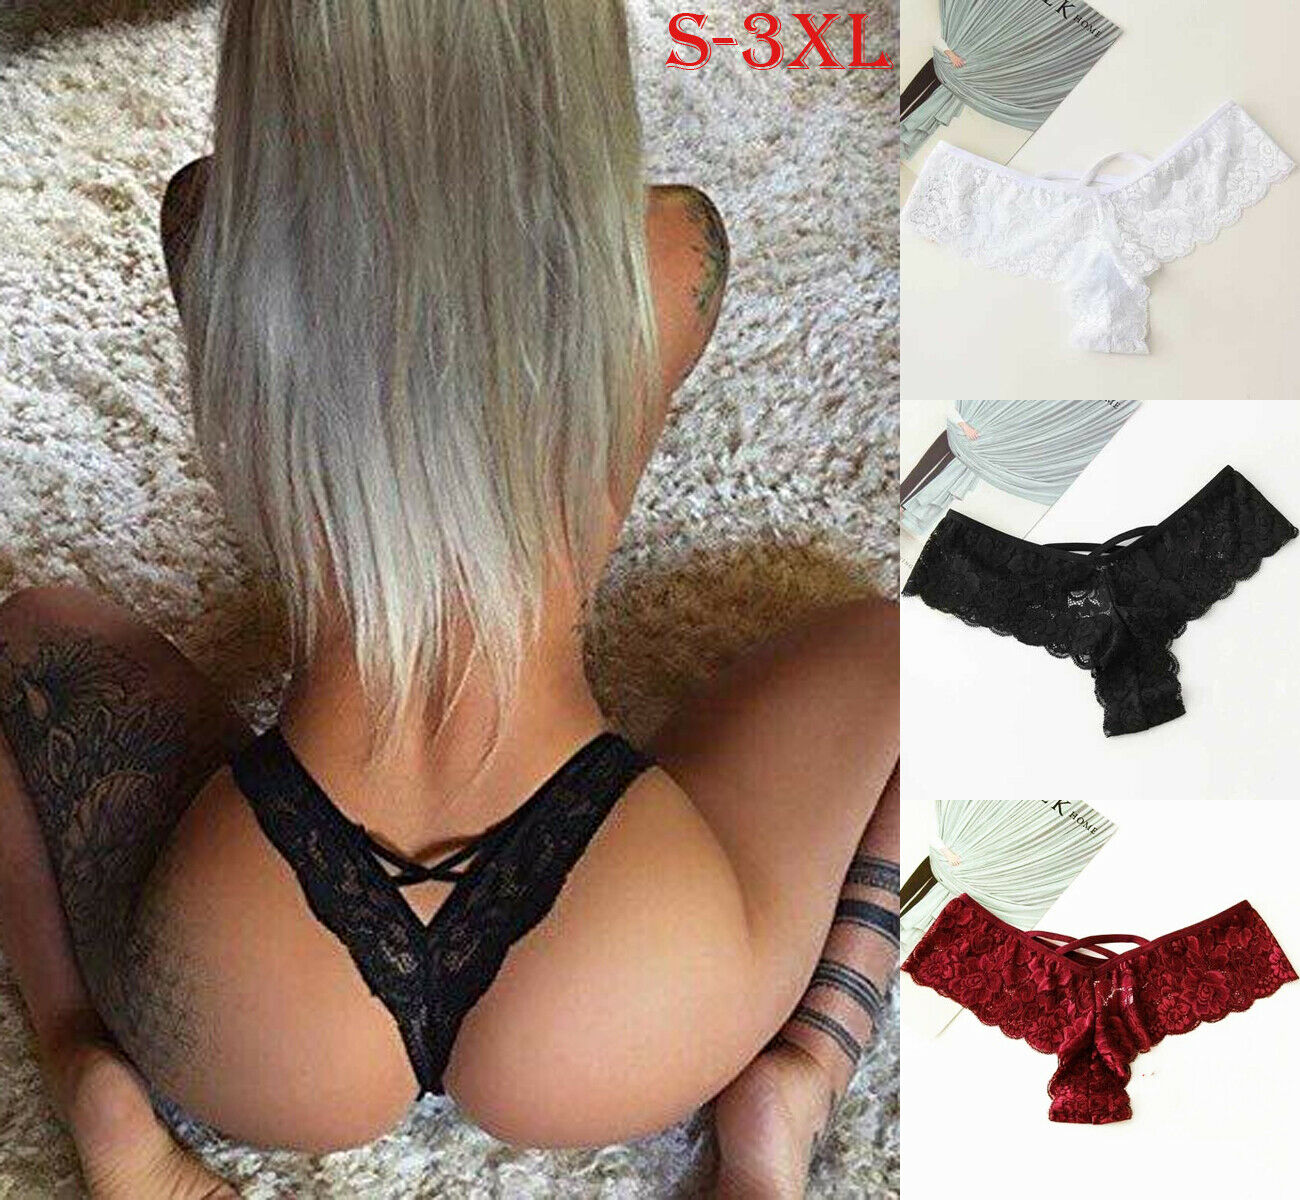 Sexy Women's Panties Thongs Female Seamless Briefs Lingerie Underwear Lace Knickers G-string Underpant Thong S-3XL